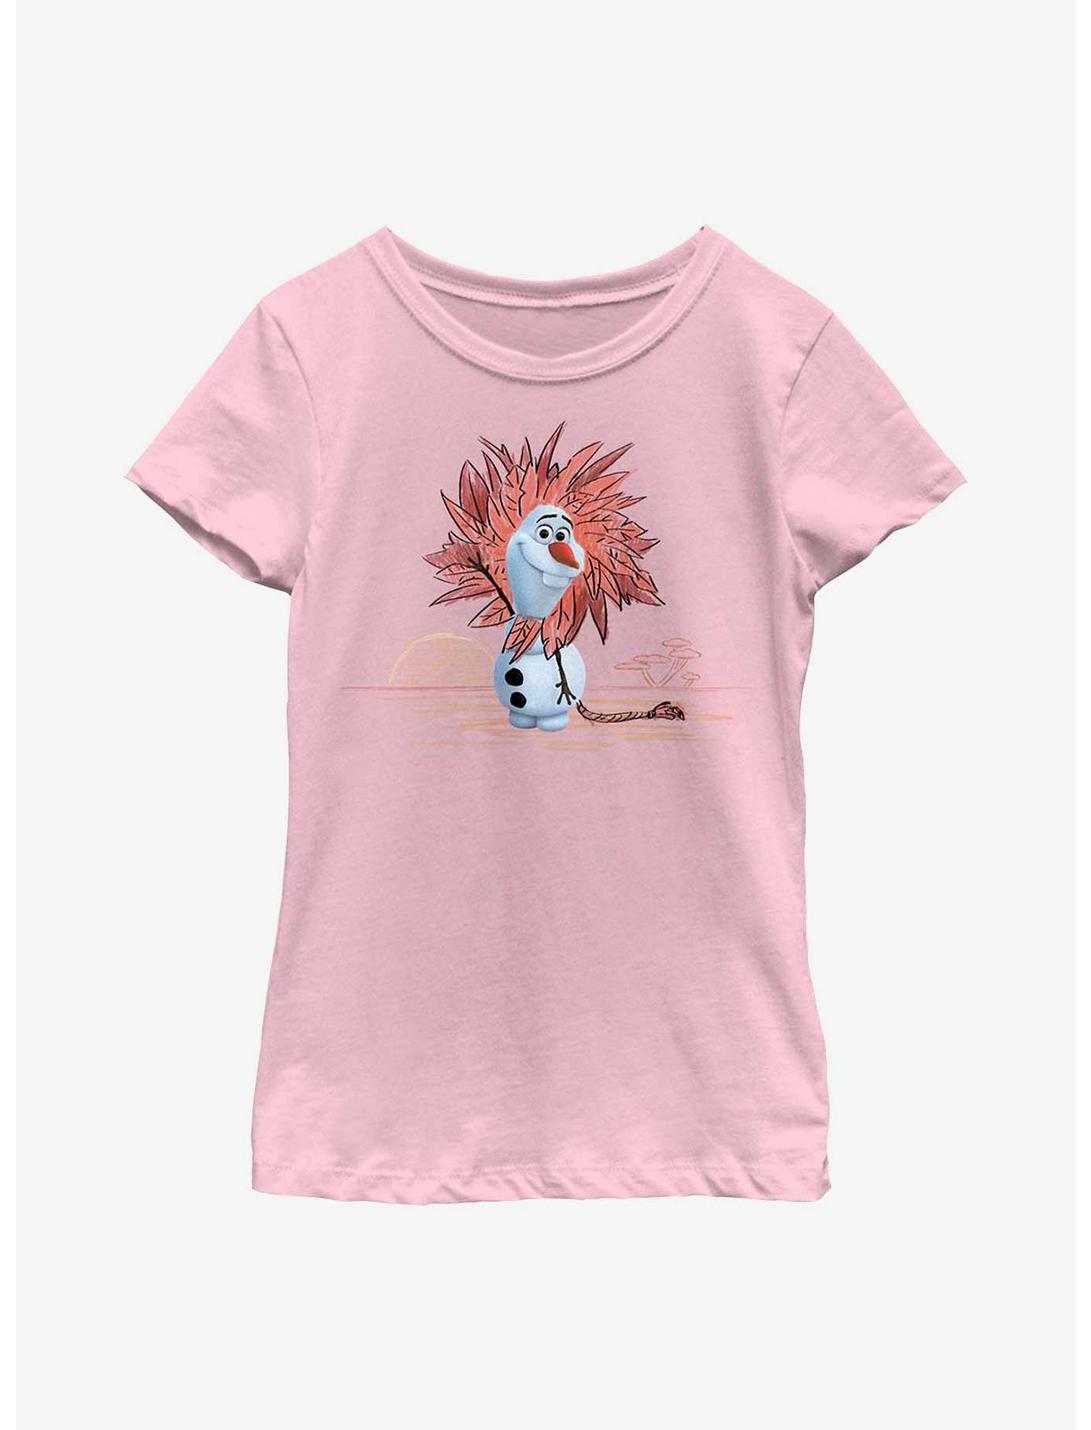 Disney Olaf Presents Lion King Outfit Youth Girls T-Shirt, PINK, hi-res